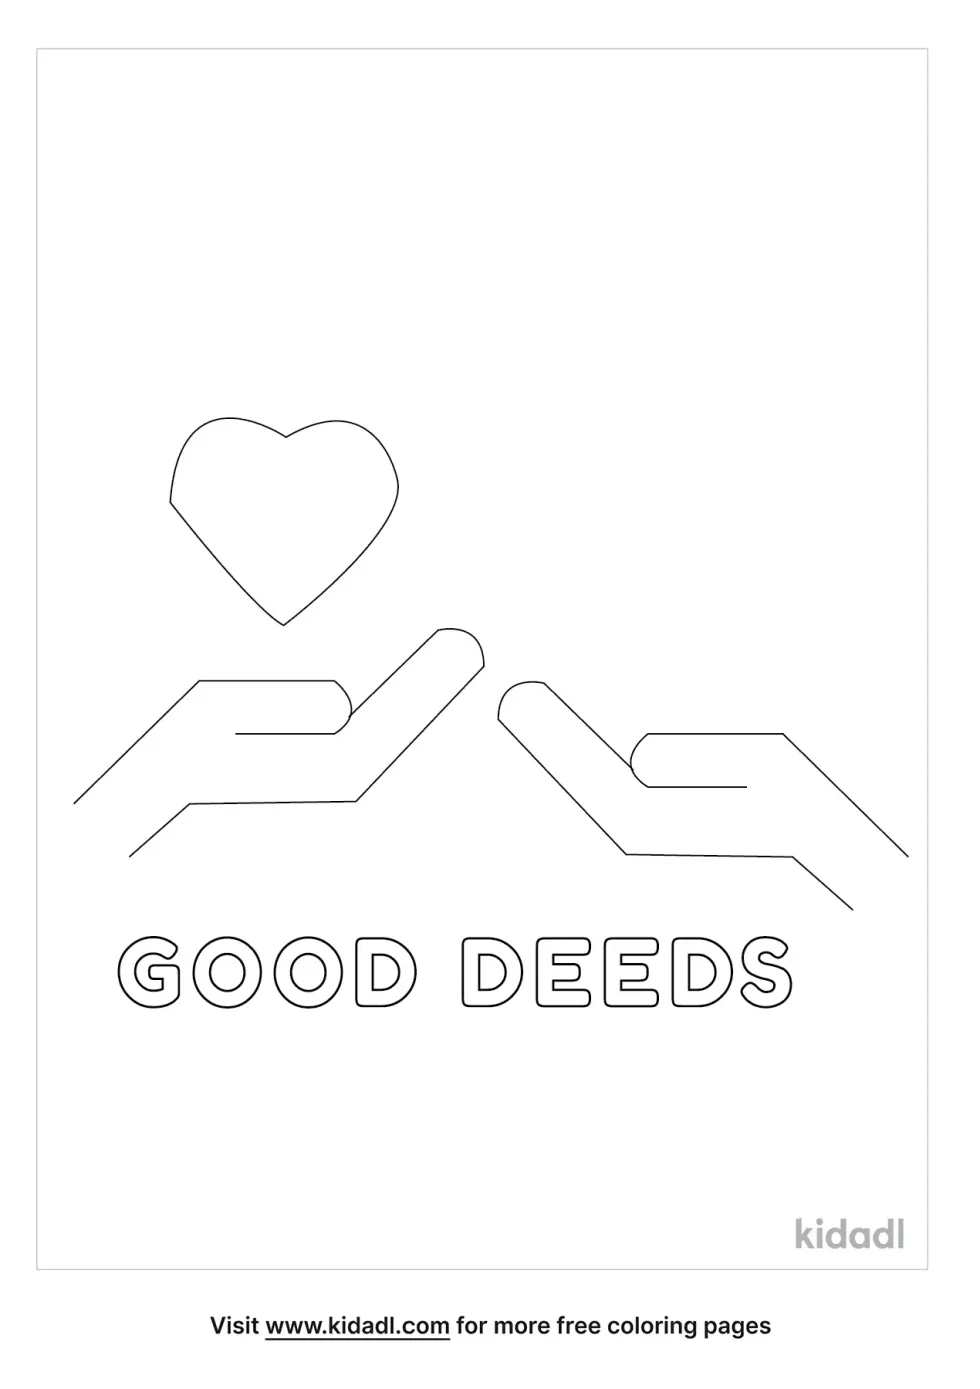 Good Deed Coloring Page